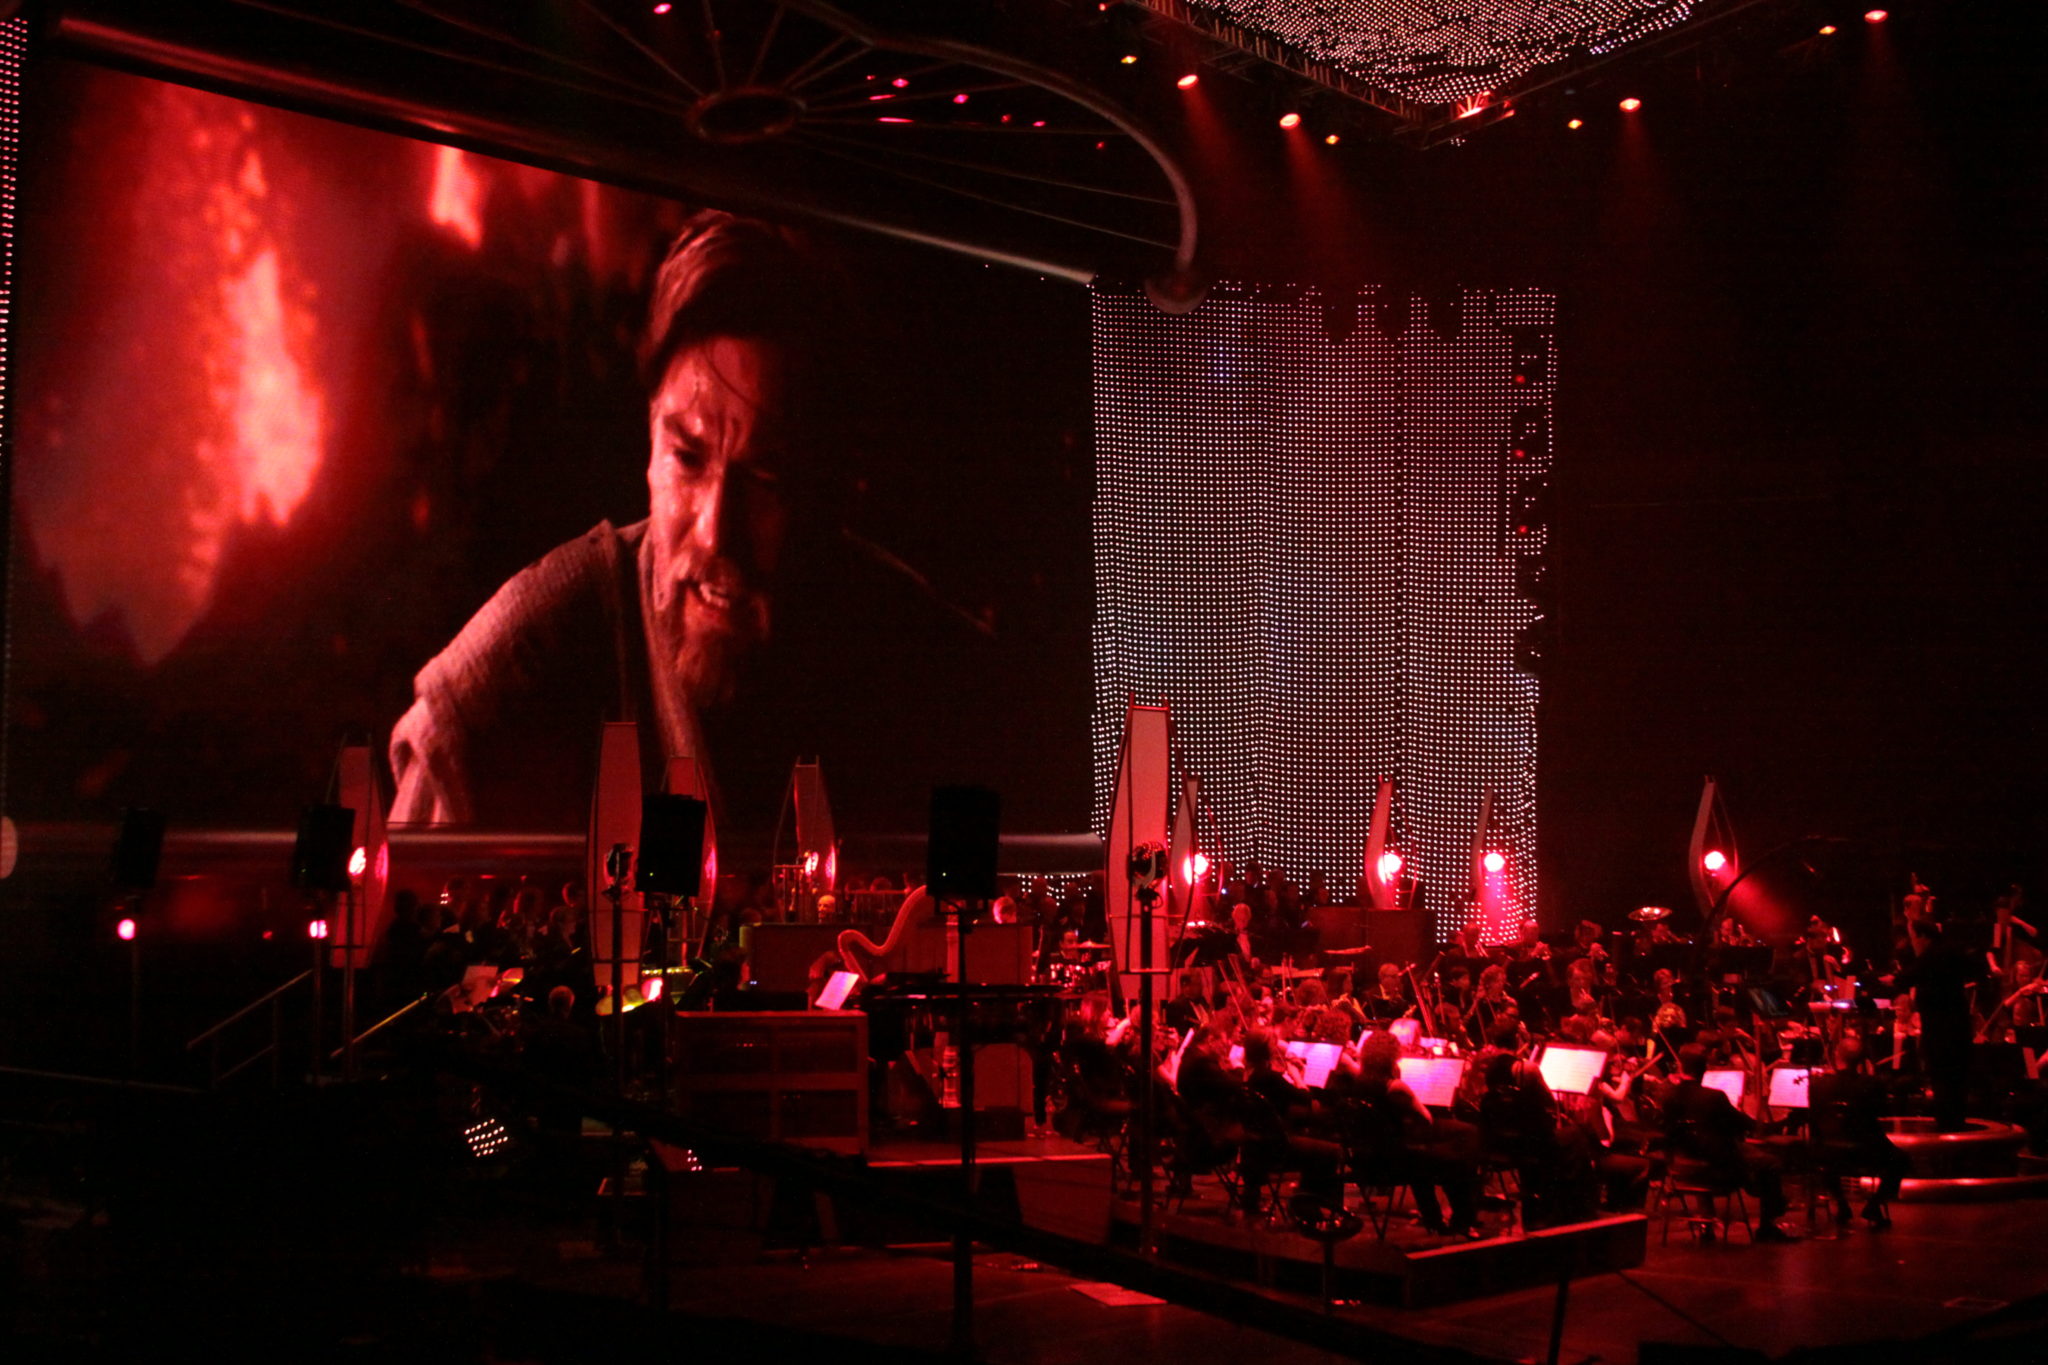 The London Royal Philharmonic live onstage for the Star Wars in Concert worldwide tour